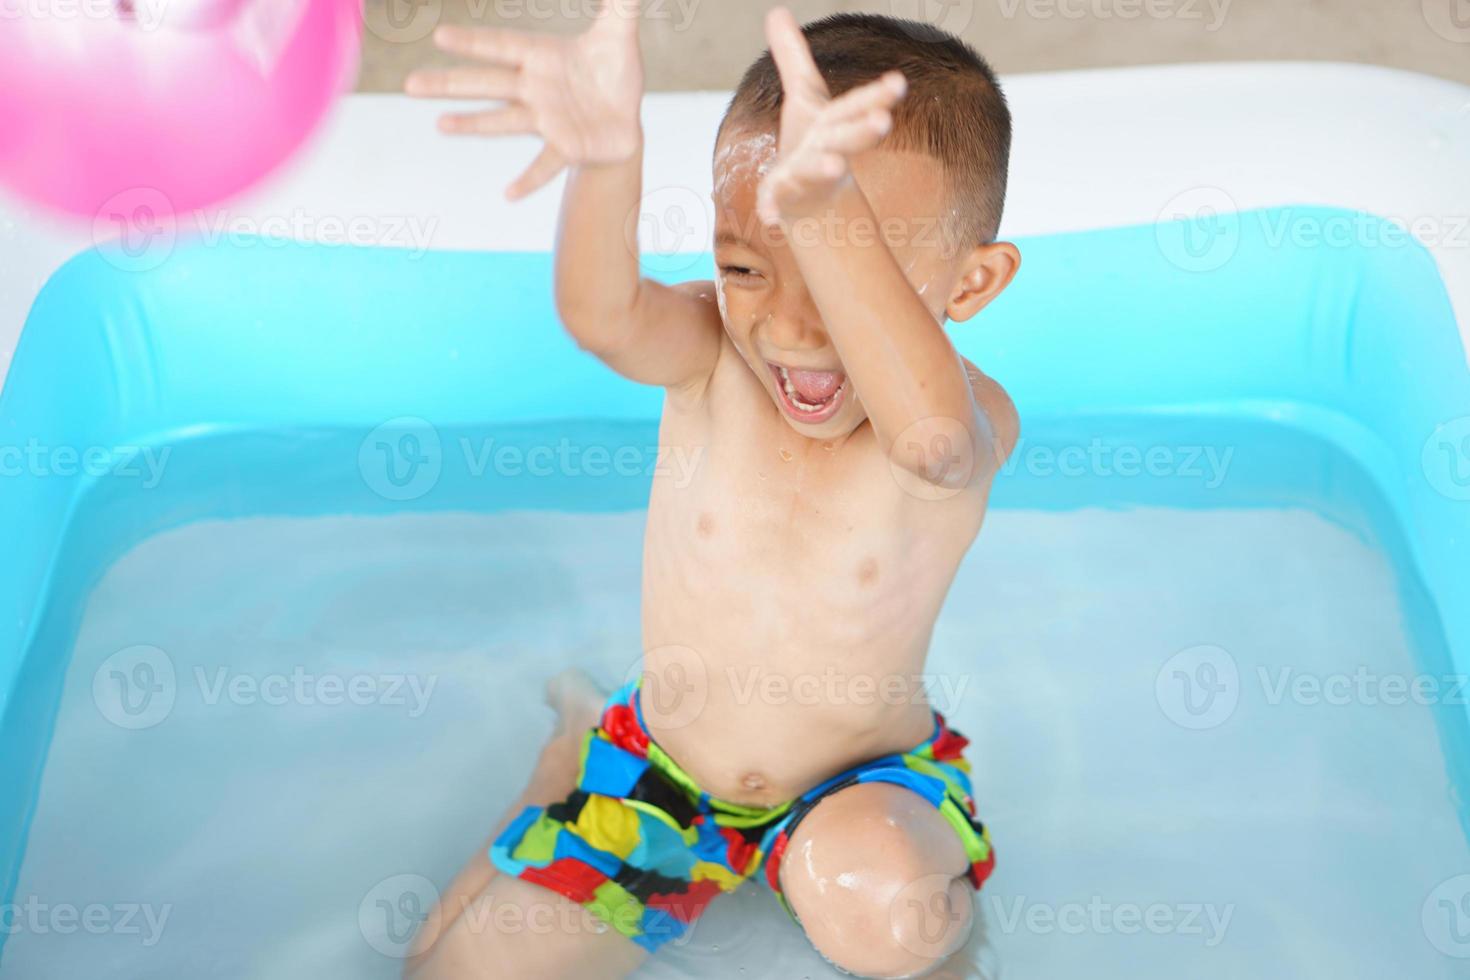 Hot weather. Boy playing with water happily in the tub. photo